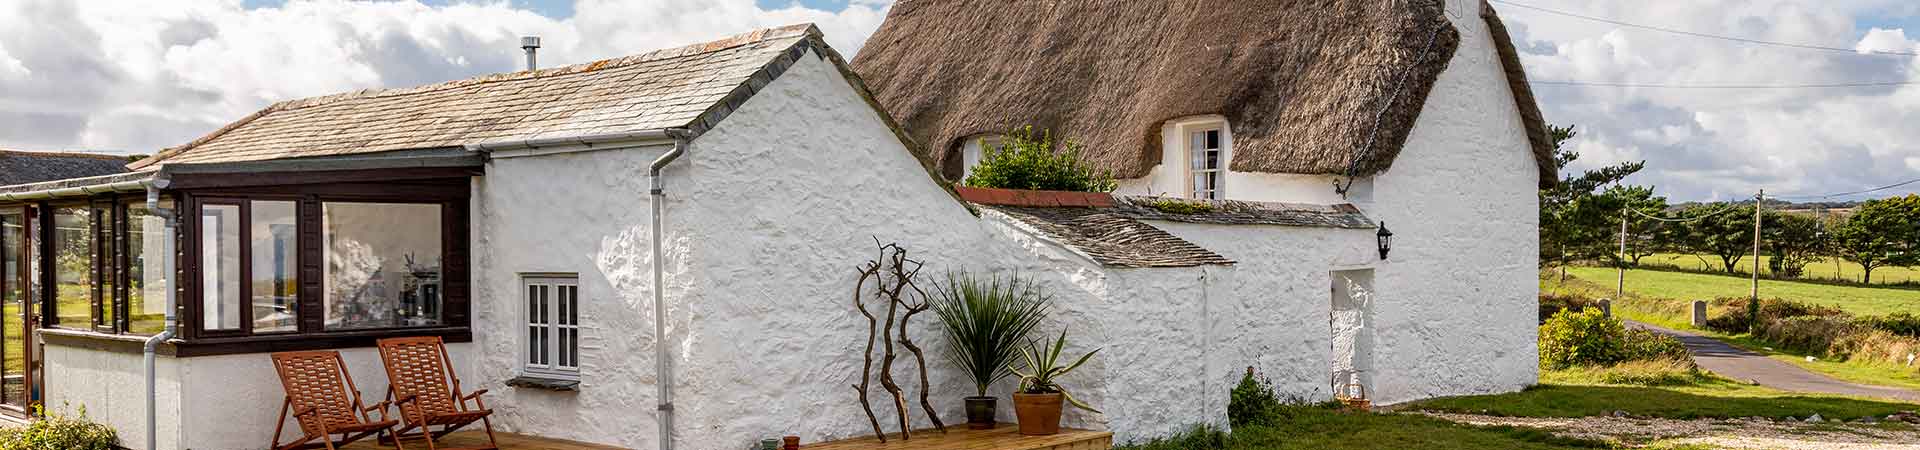 Thatched holiday cottages in Northumberland